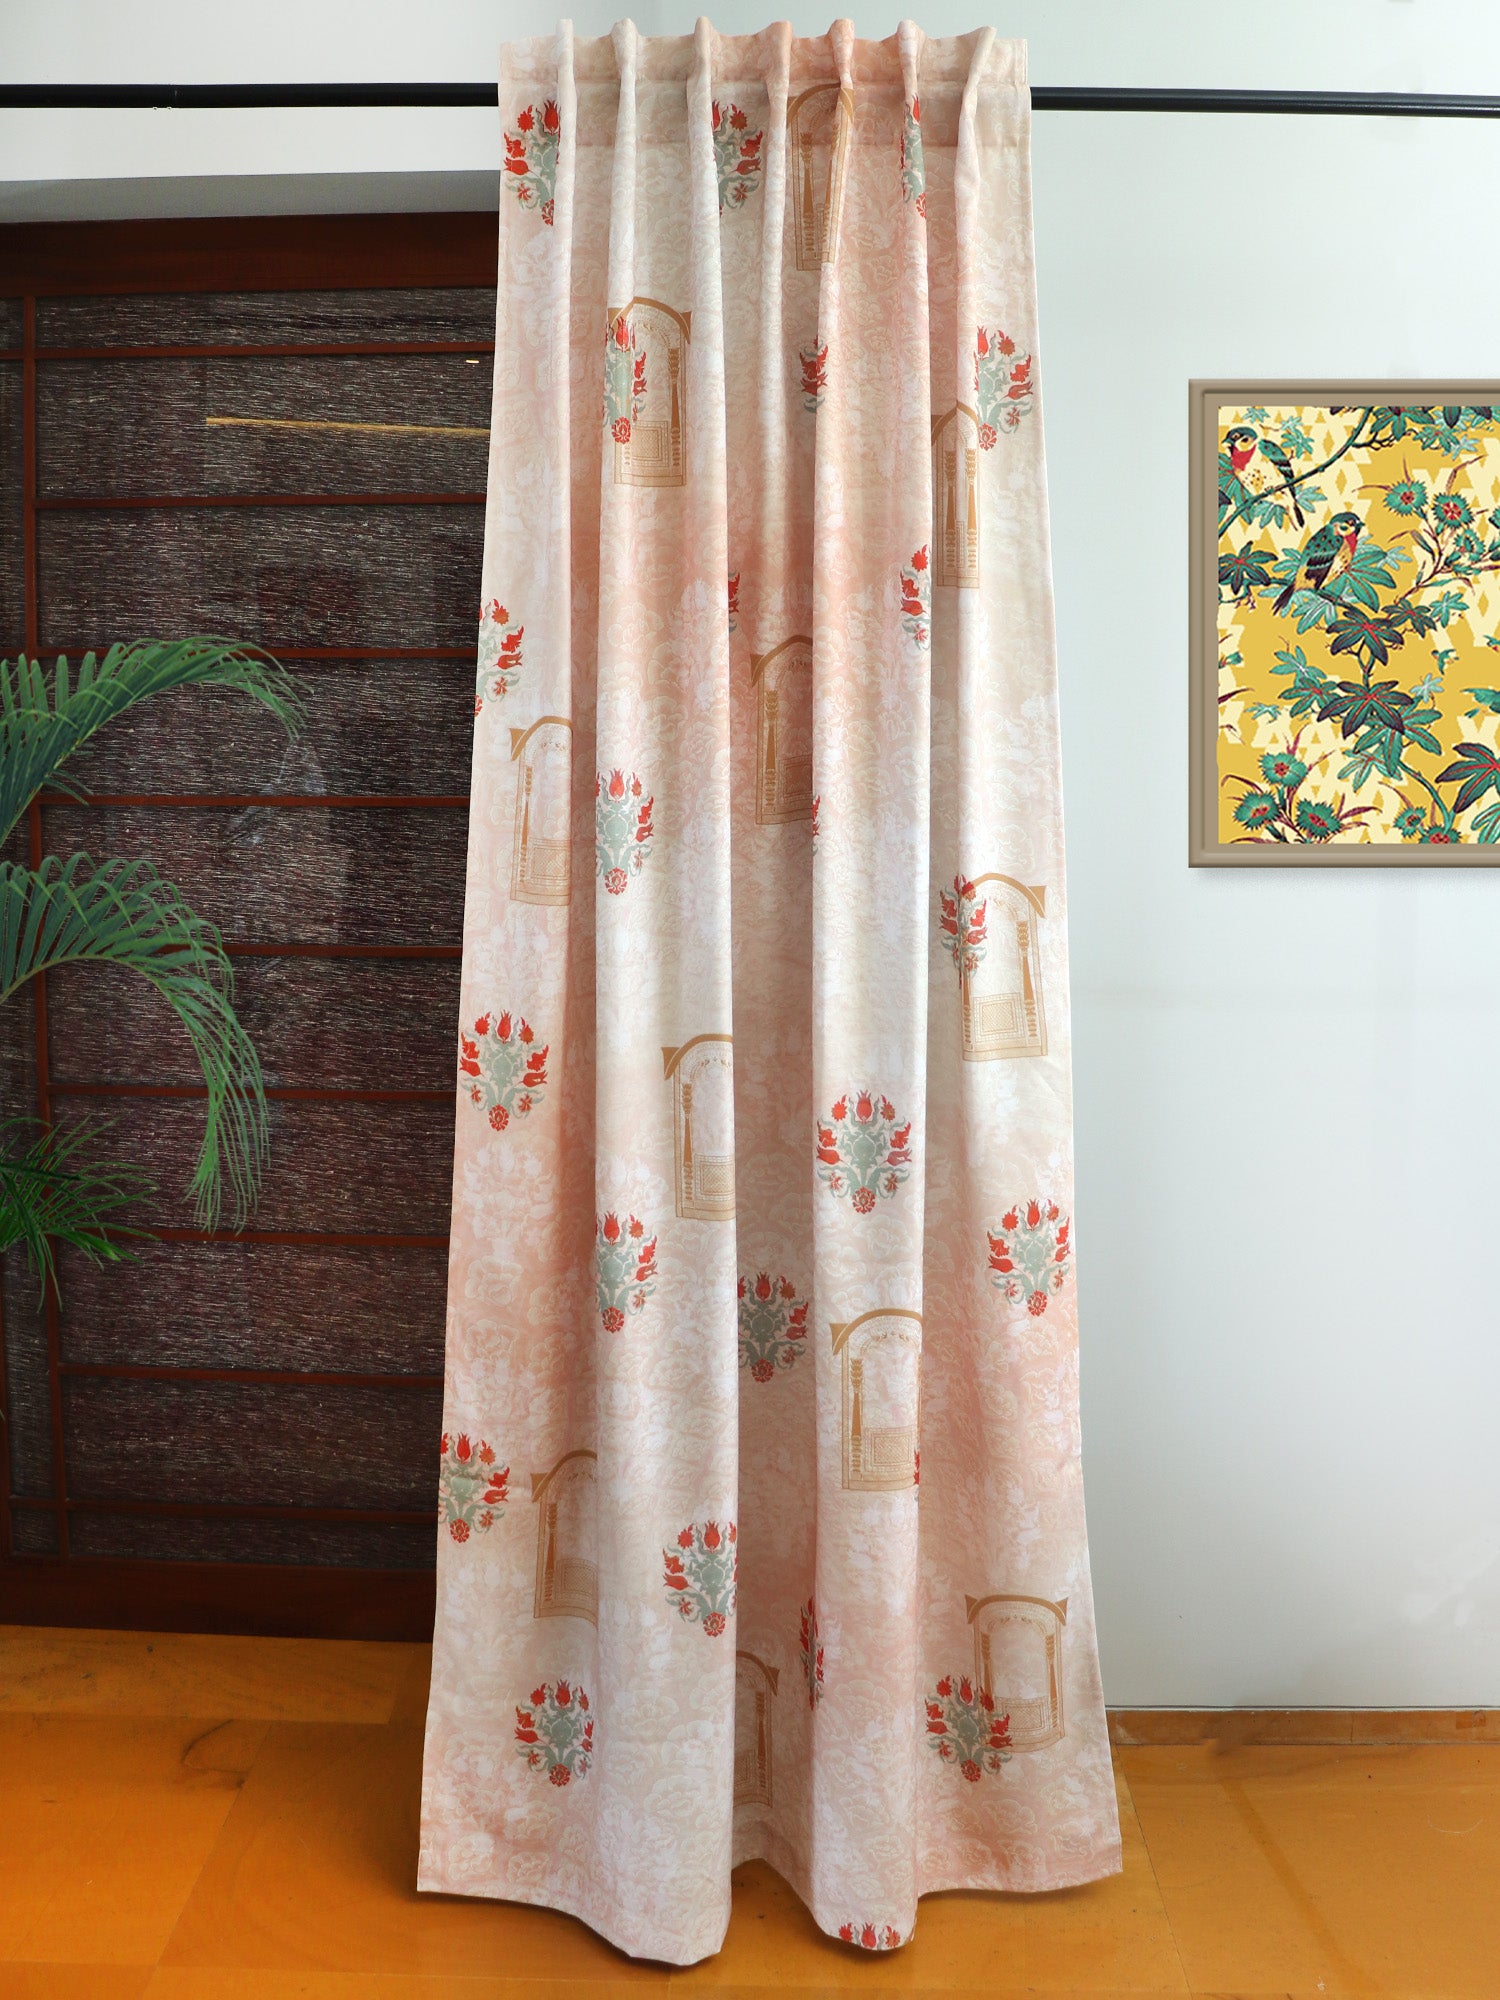 Room Darkening Blackout Door Curtain 7 Feet | Cotton Blend Curtain for Bedroom and Living Room with Hidden Loop | Mughal Jharokha Printed in Beige Brown Color - 50x84 inches